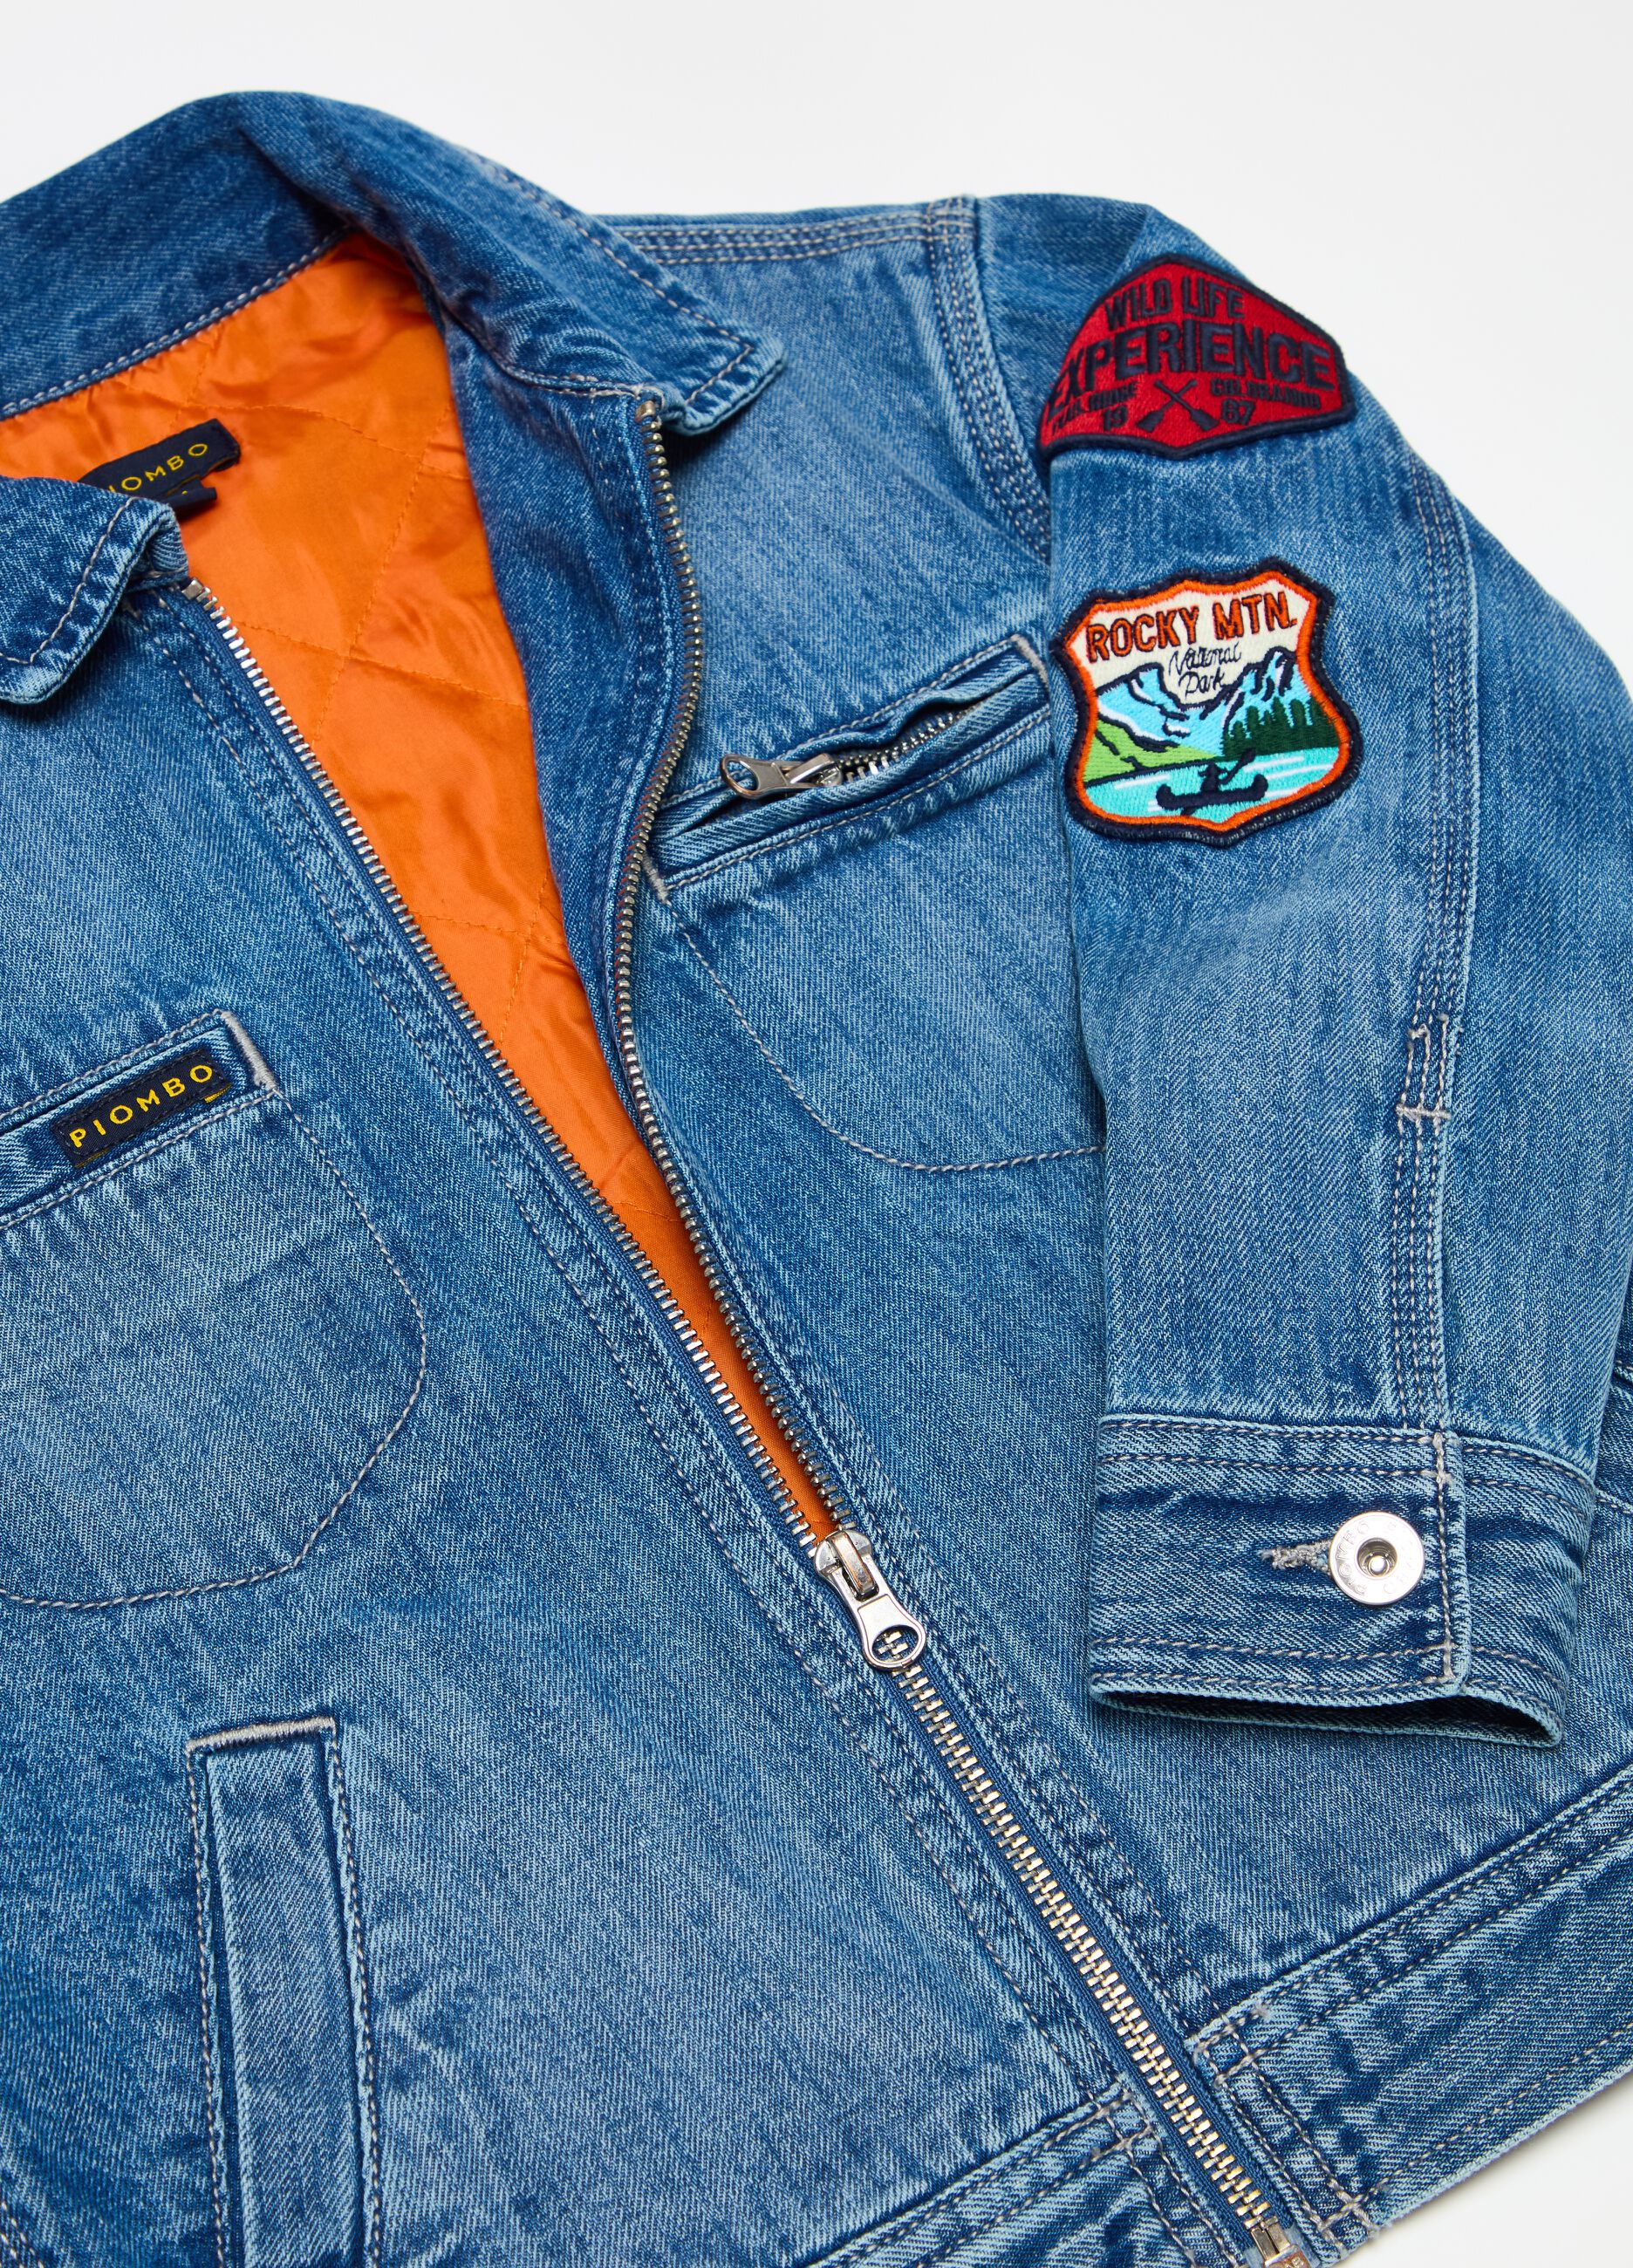 Full-zip jacket in denim with patch